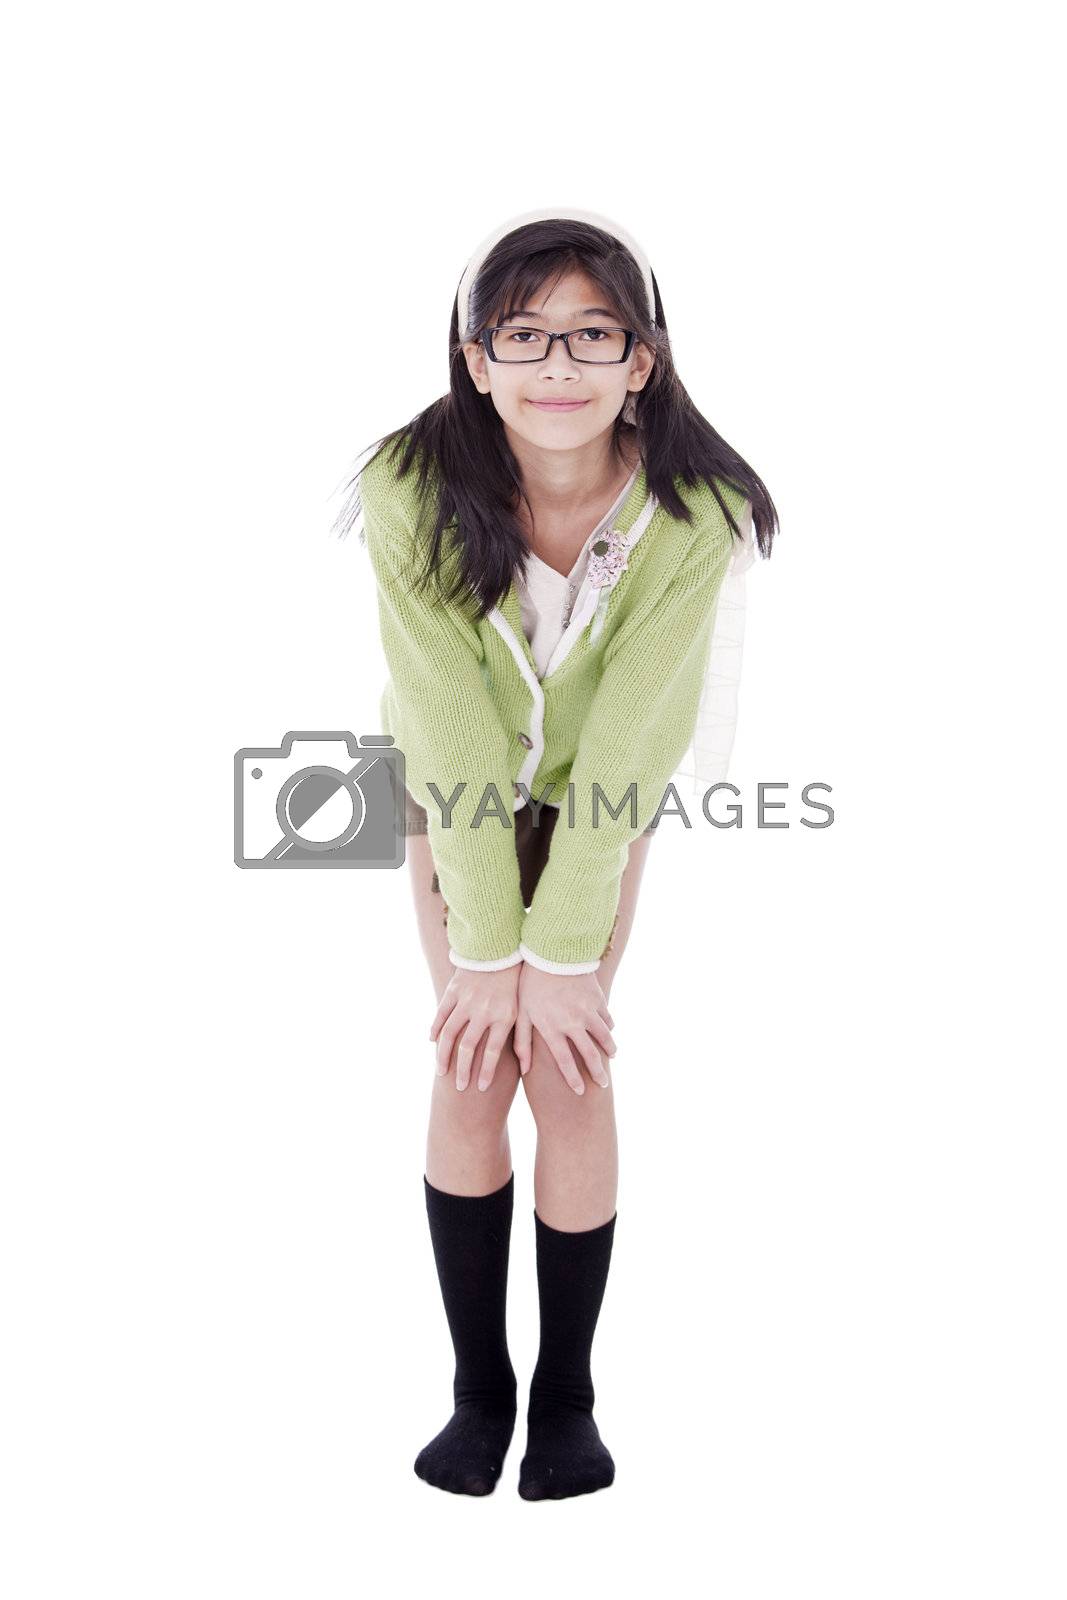 Royalty free image of Girl in green sweater and glasses bending forward, hand on knees by jarenwicklund